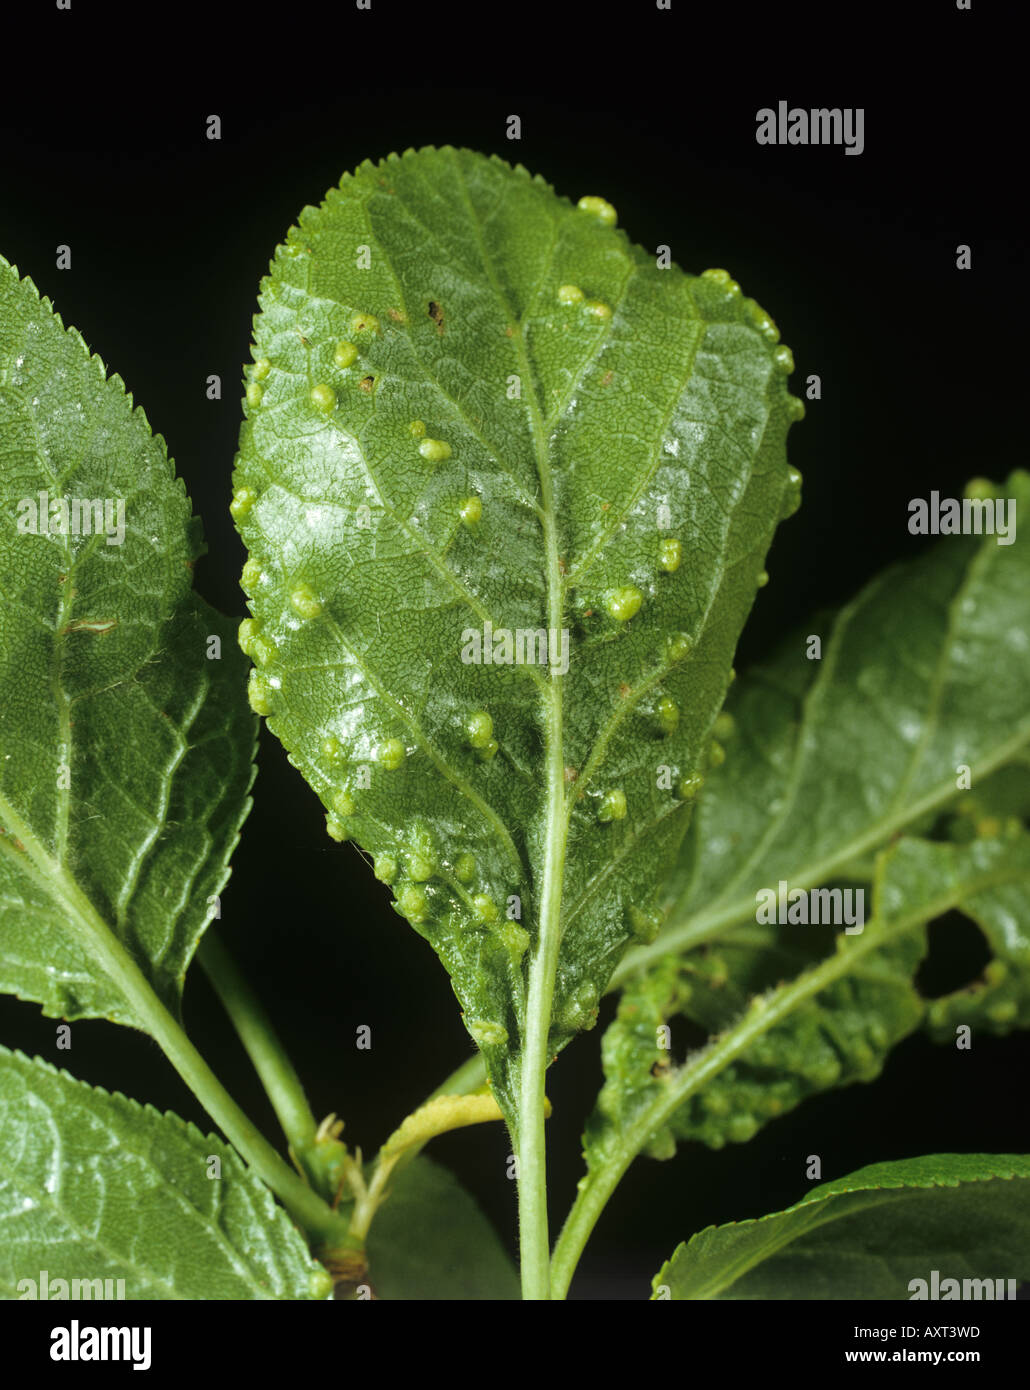 Leaf gall mite Eriophyes similis galls on cherry leaves Stock Photo